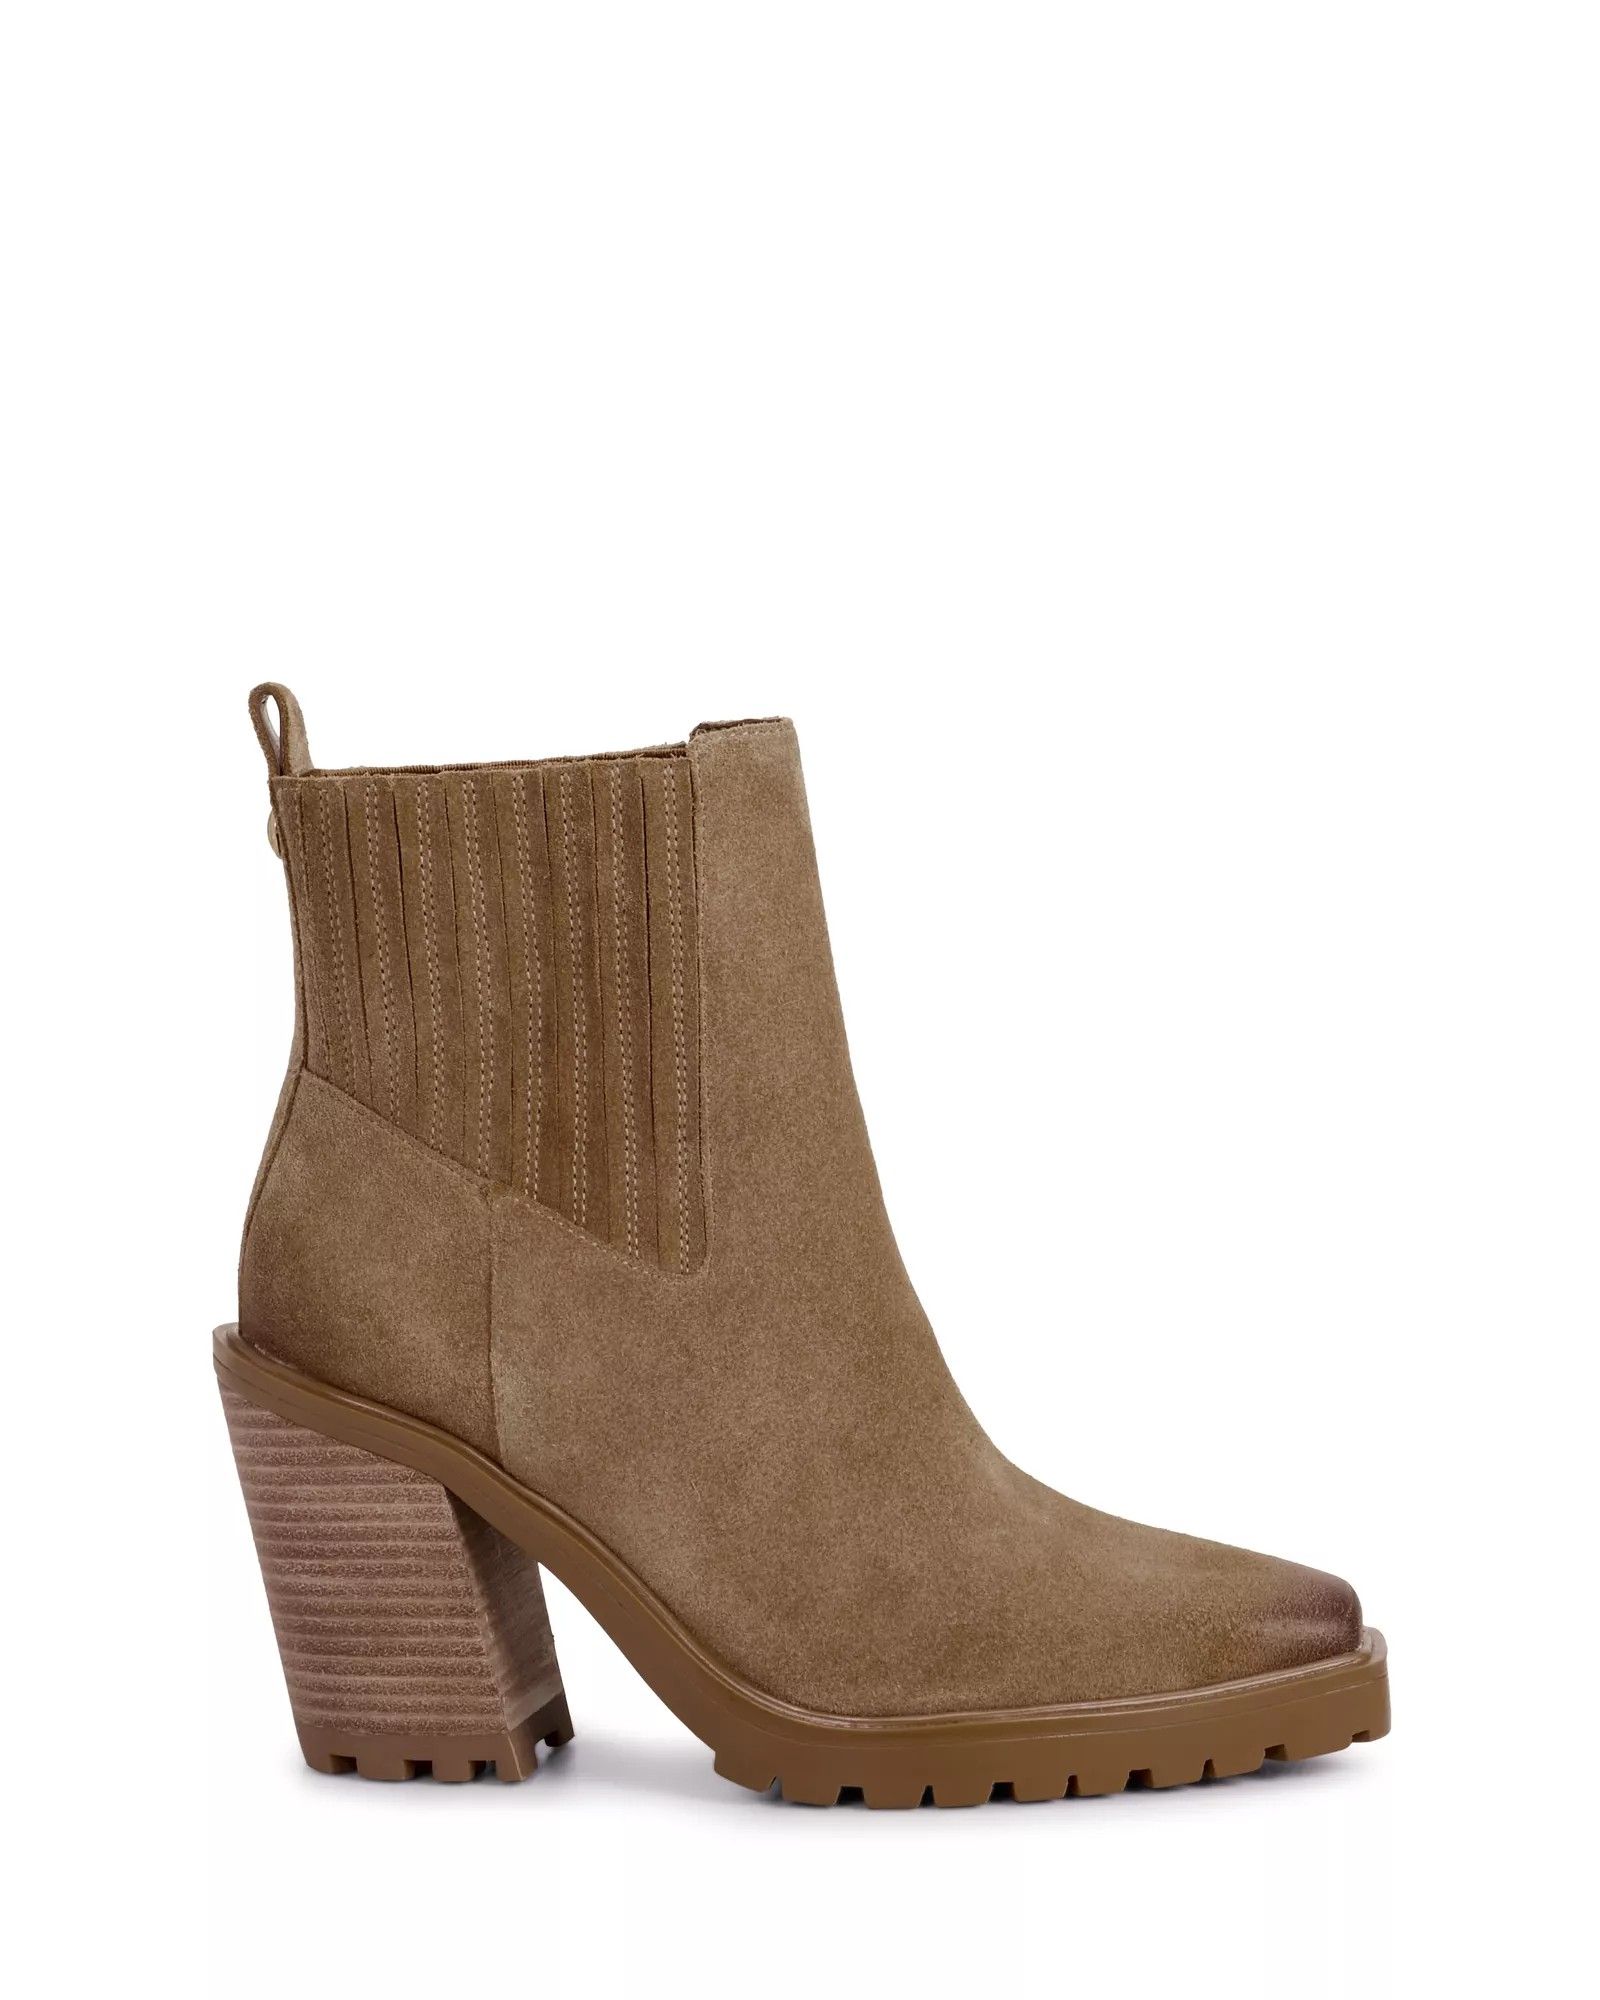 Vince Camuto Aresse Bootie | Vince Camuto